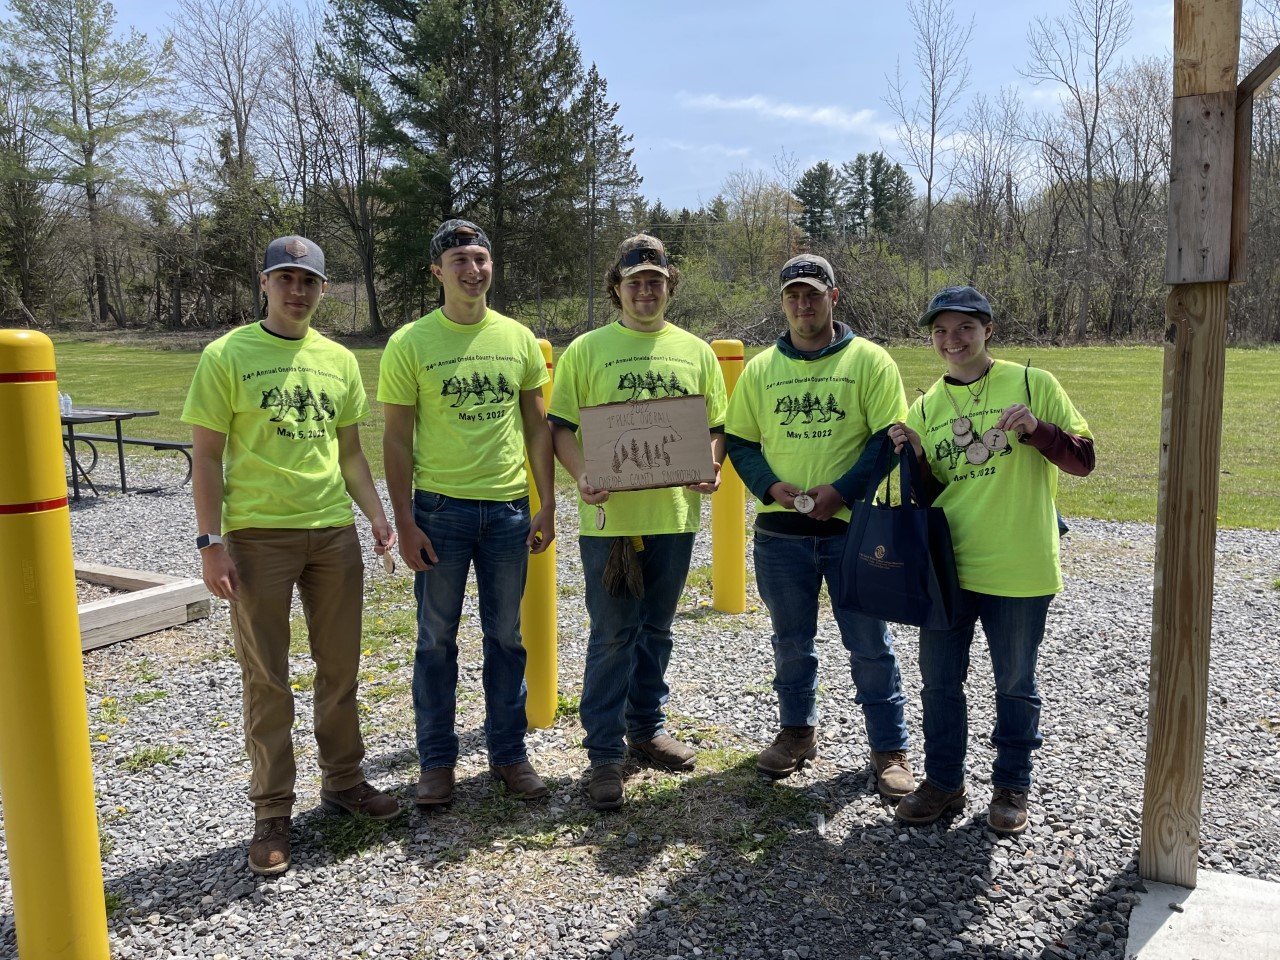 The 2022 Oneida County Envirothon winning team was from Oneida Herkimer Madison BOCES. The team was made up of Marc Fellows, Laura Green, Dylan Valenti, Collin Williams, and Eden Koperda and advised by Phil Lacelle.